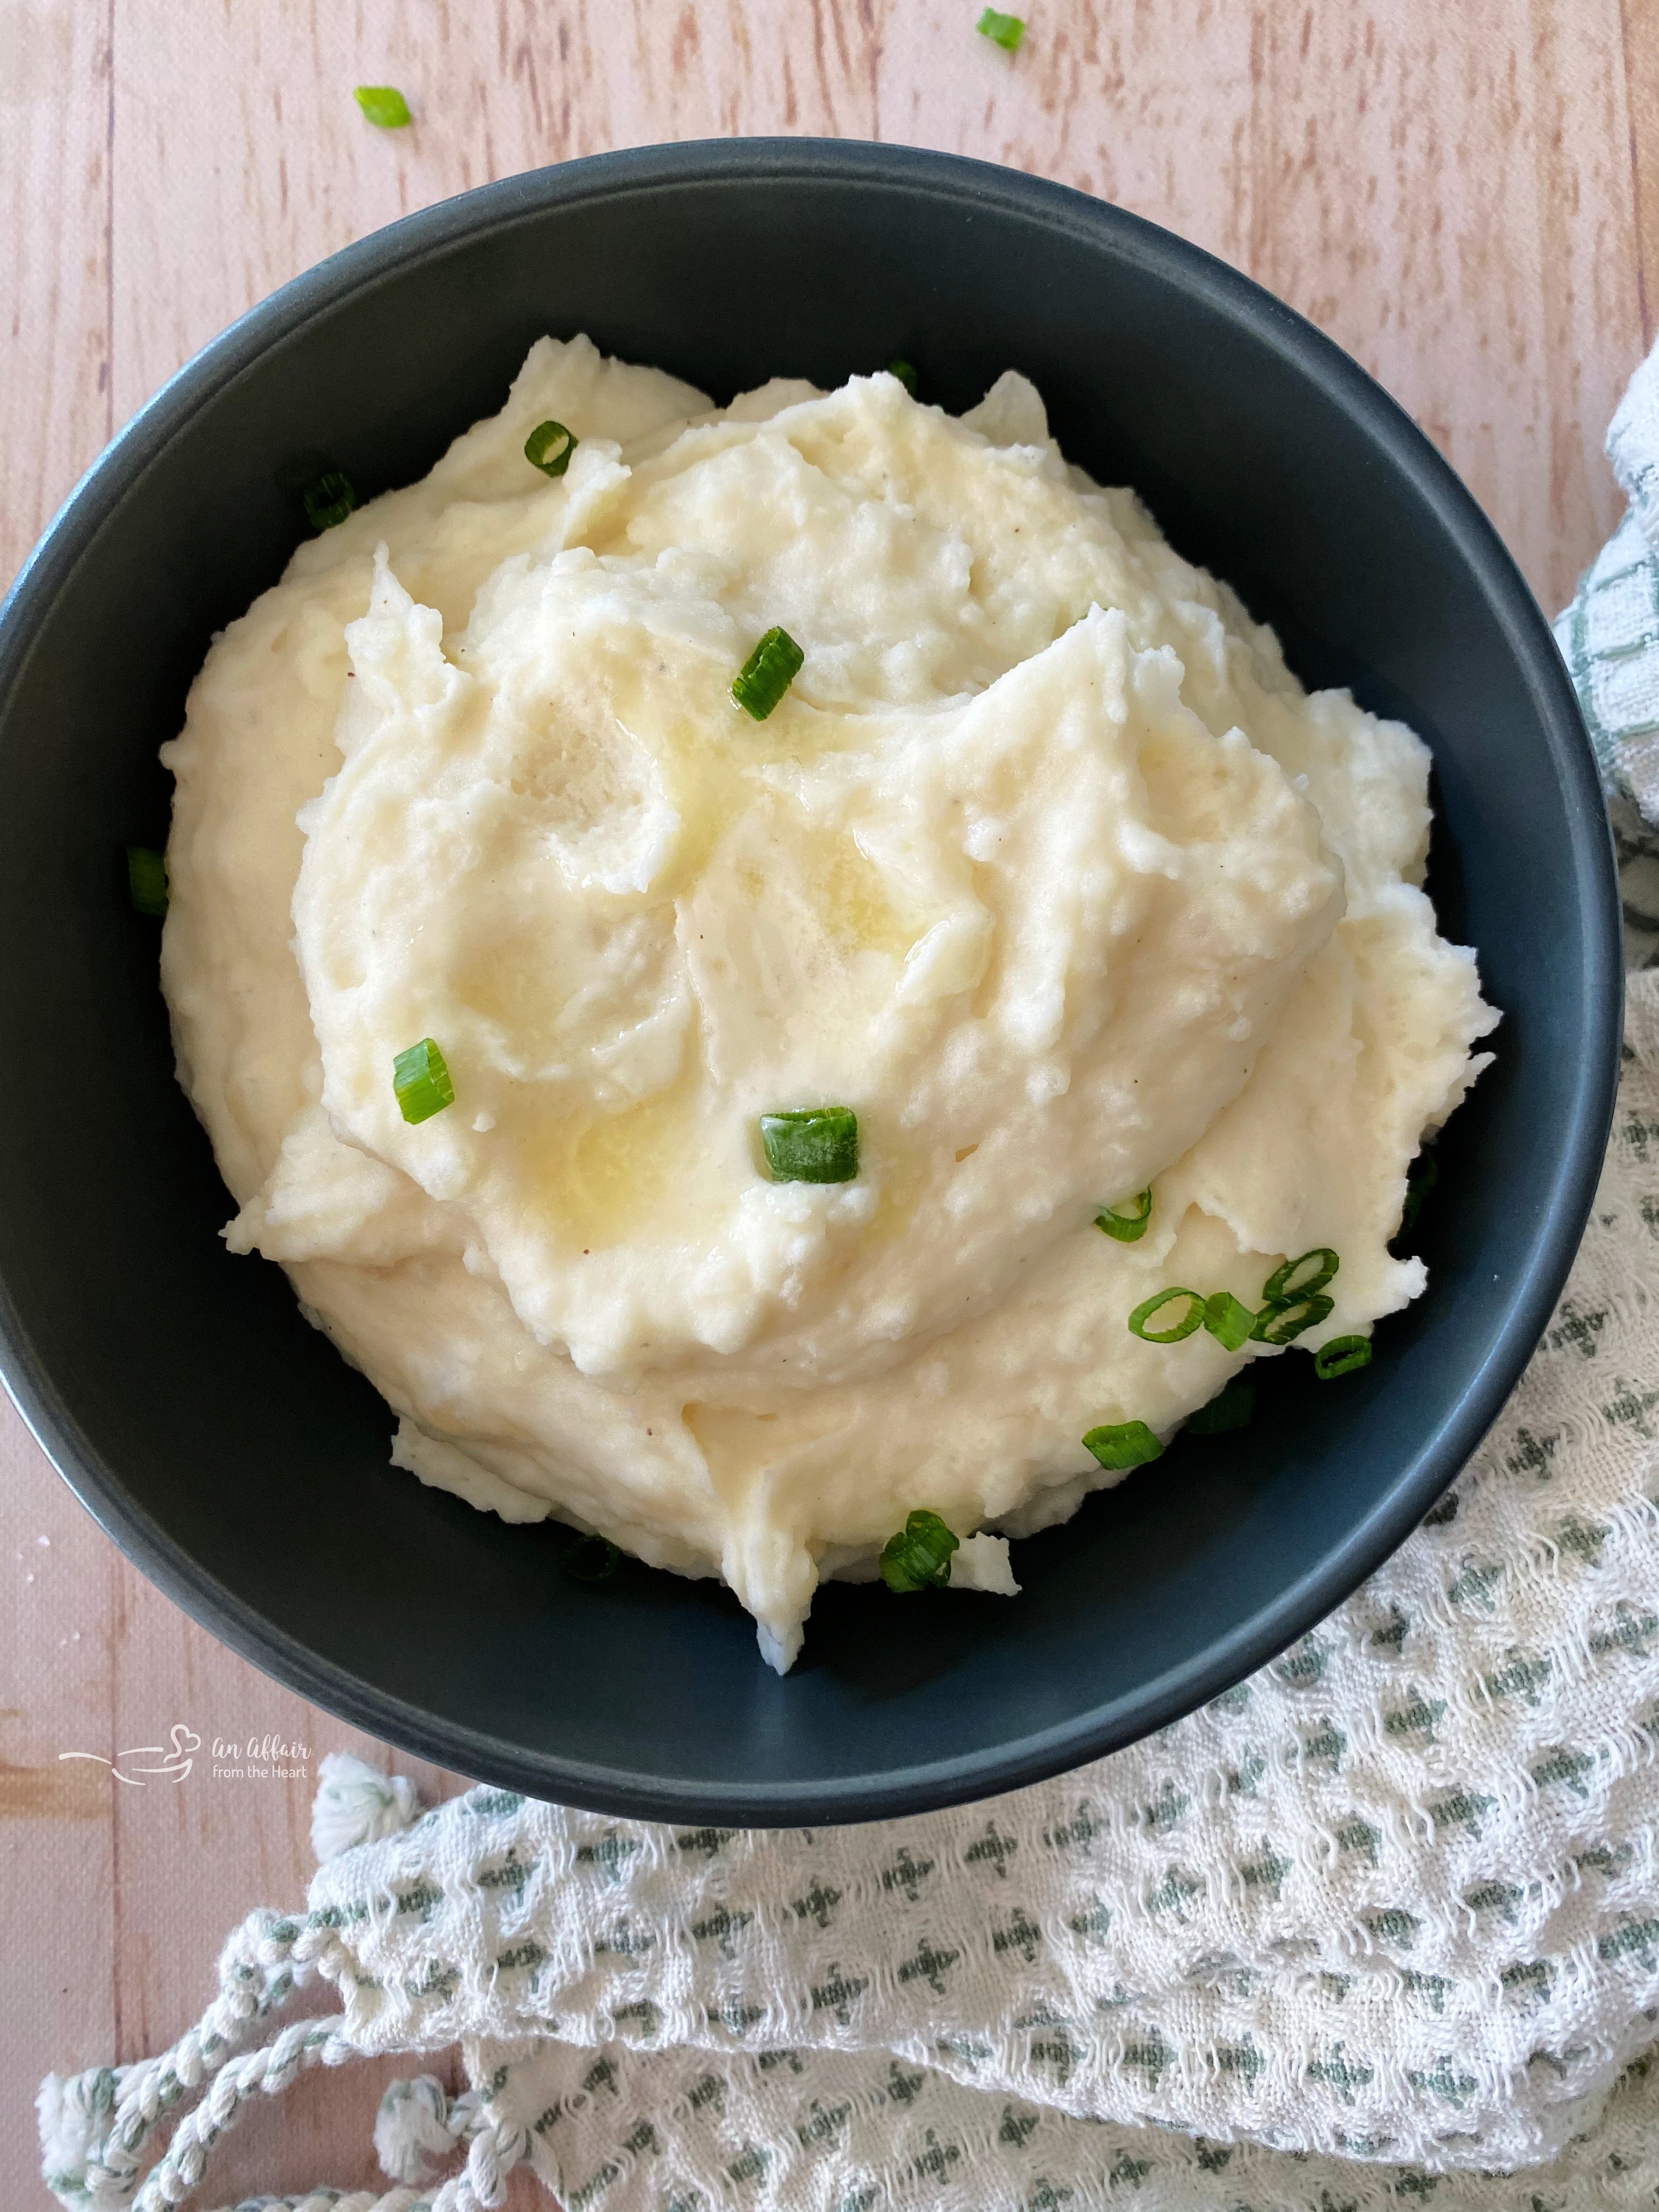 Top view of mashed potatoes with fresh chives